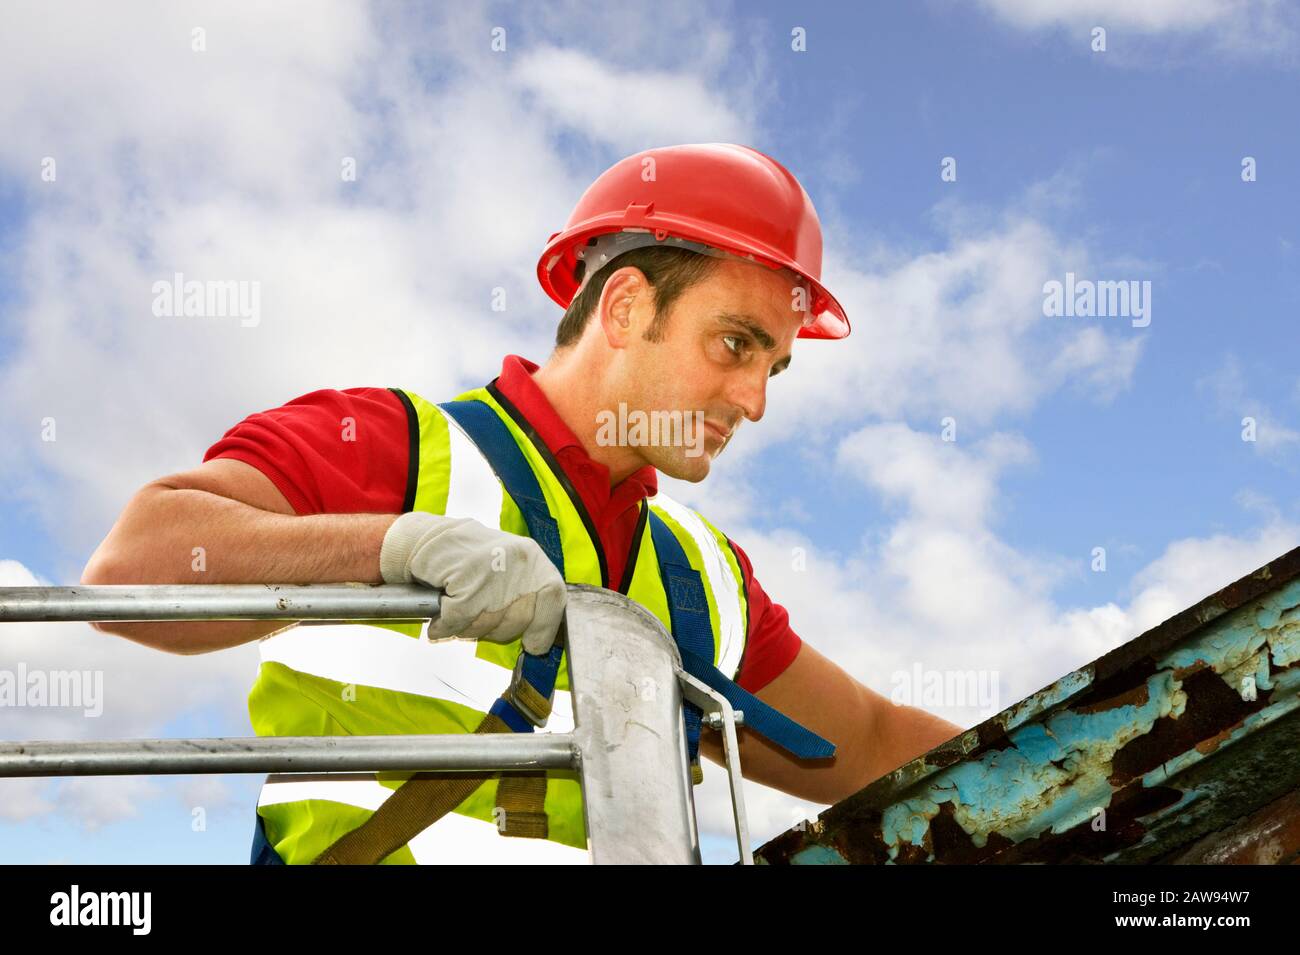 Workman in a cherry picker wearing safety clothing and inspecting a roof Stock Photo